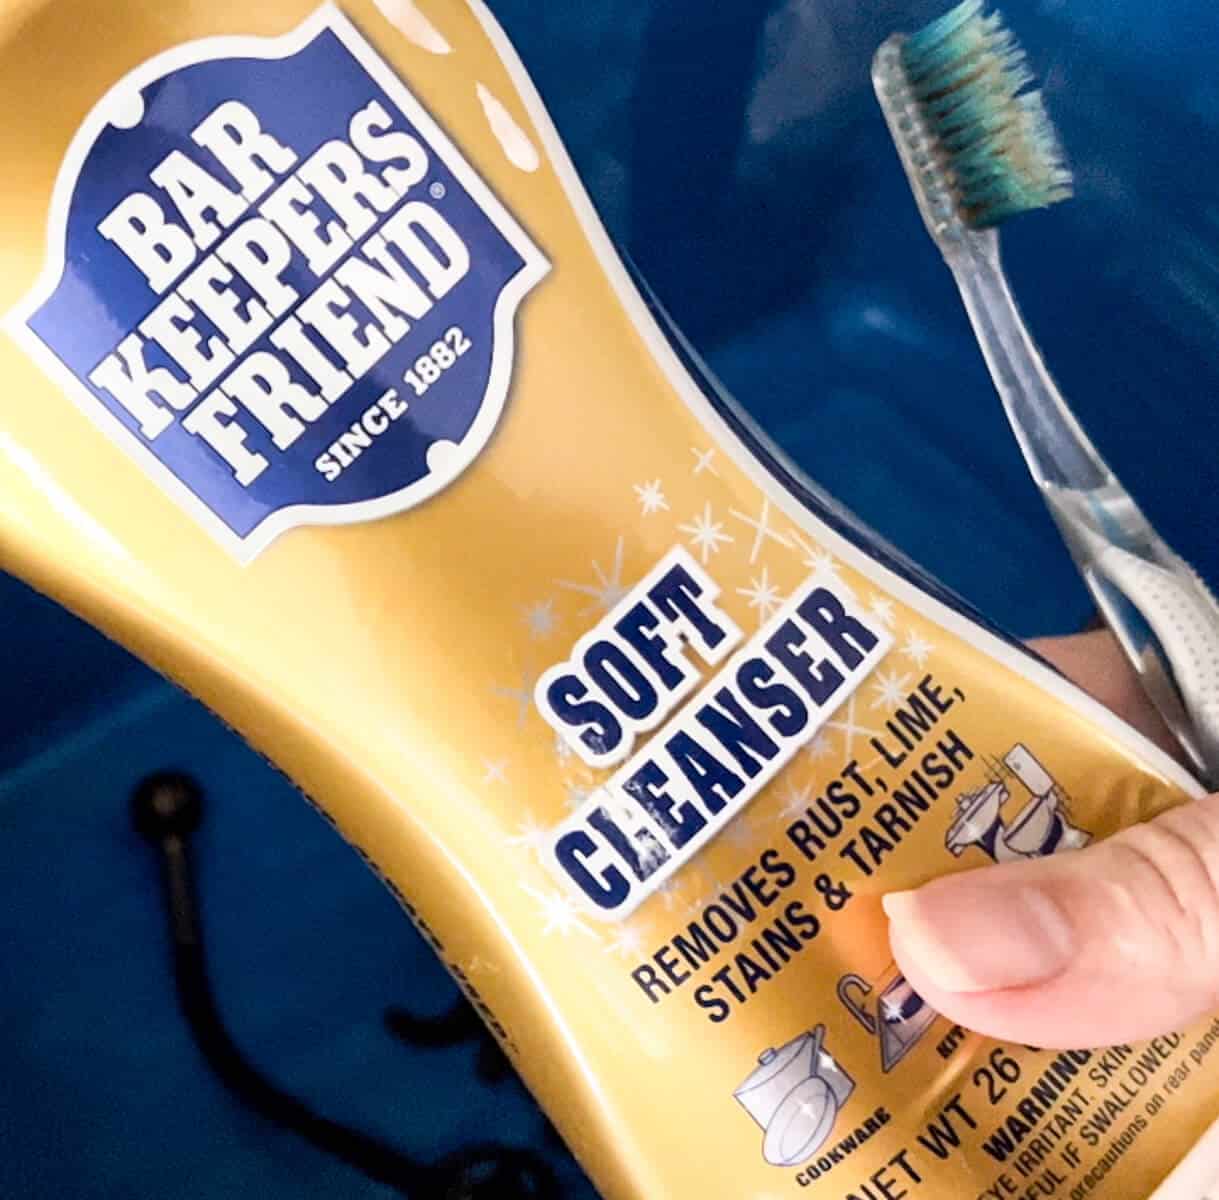 bar keepers friend cleanser